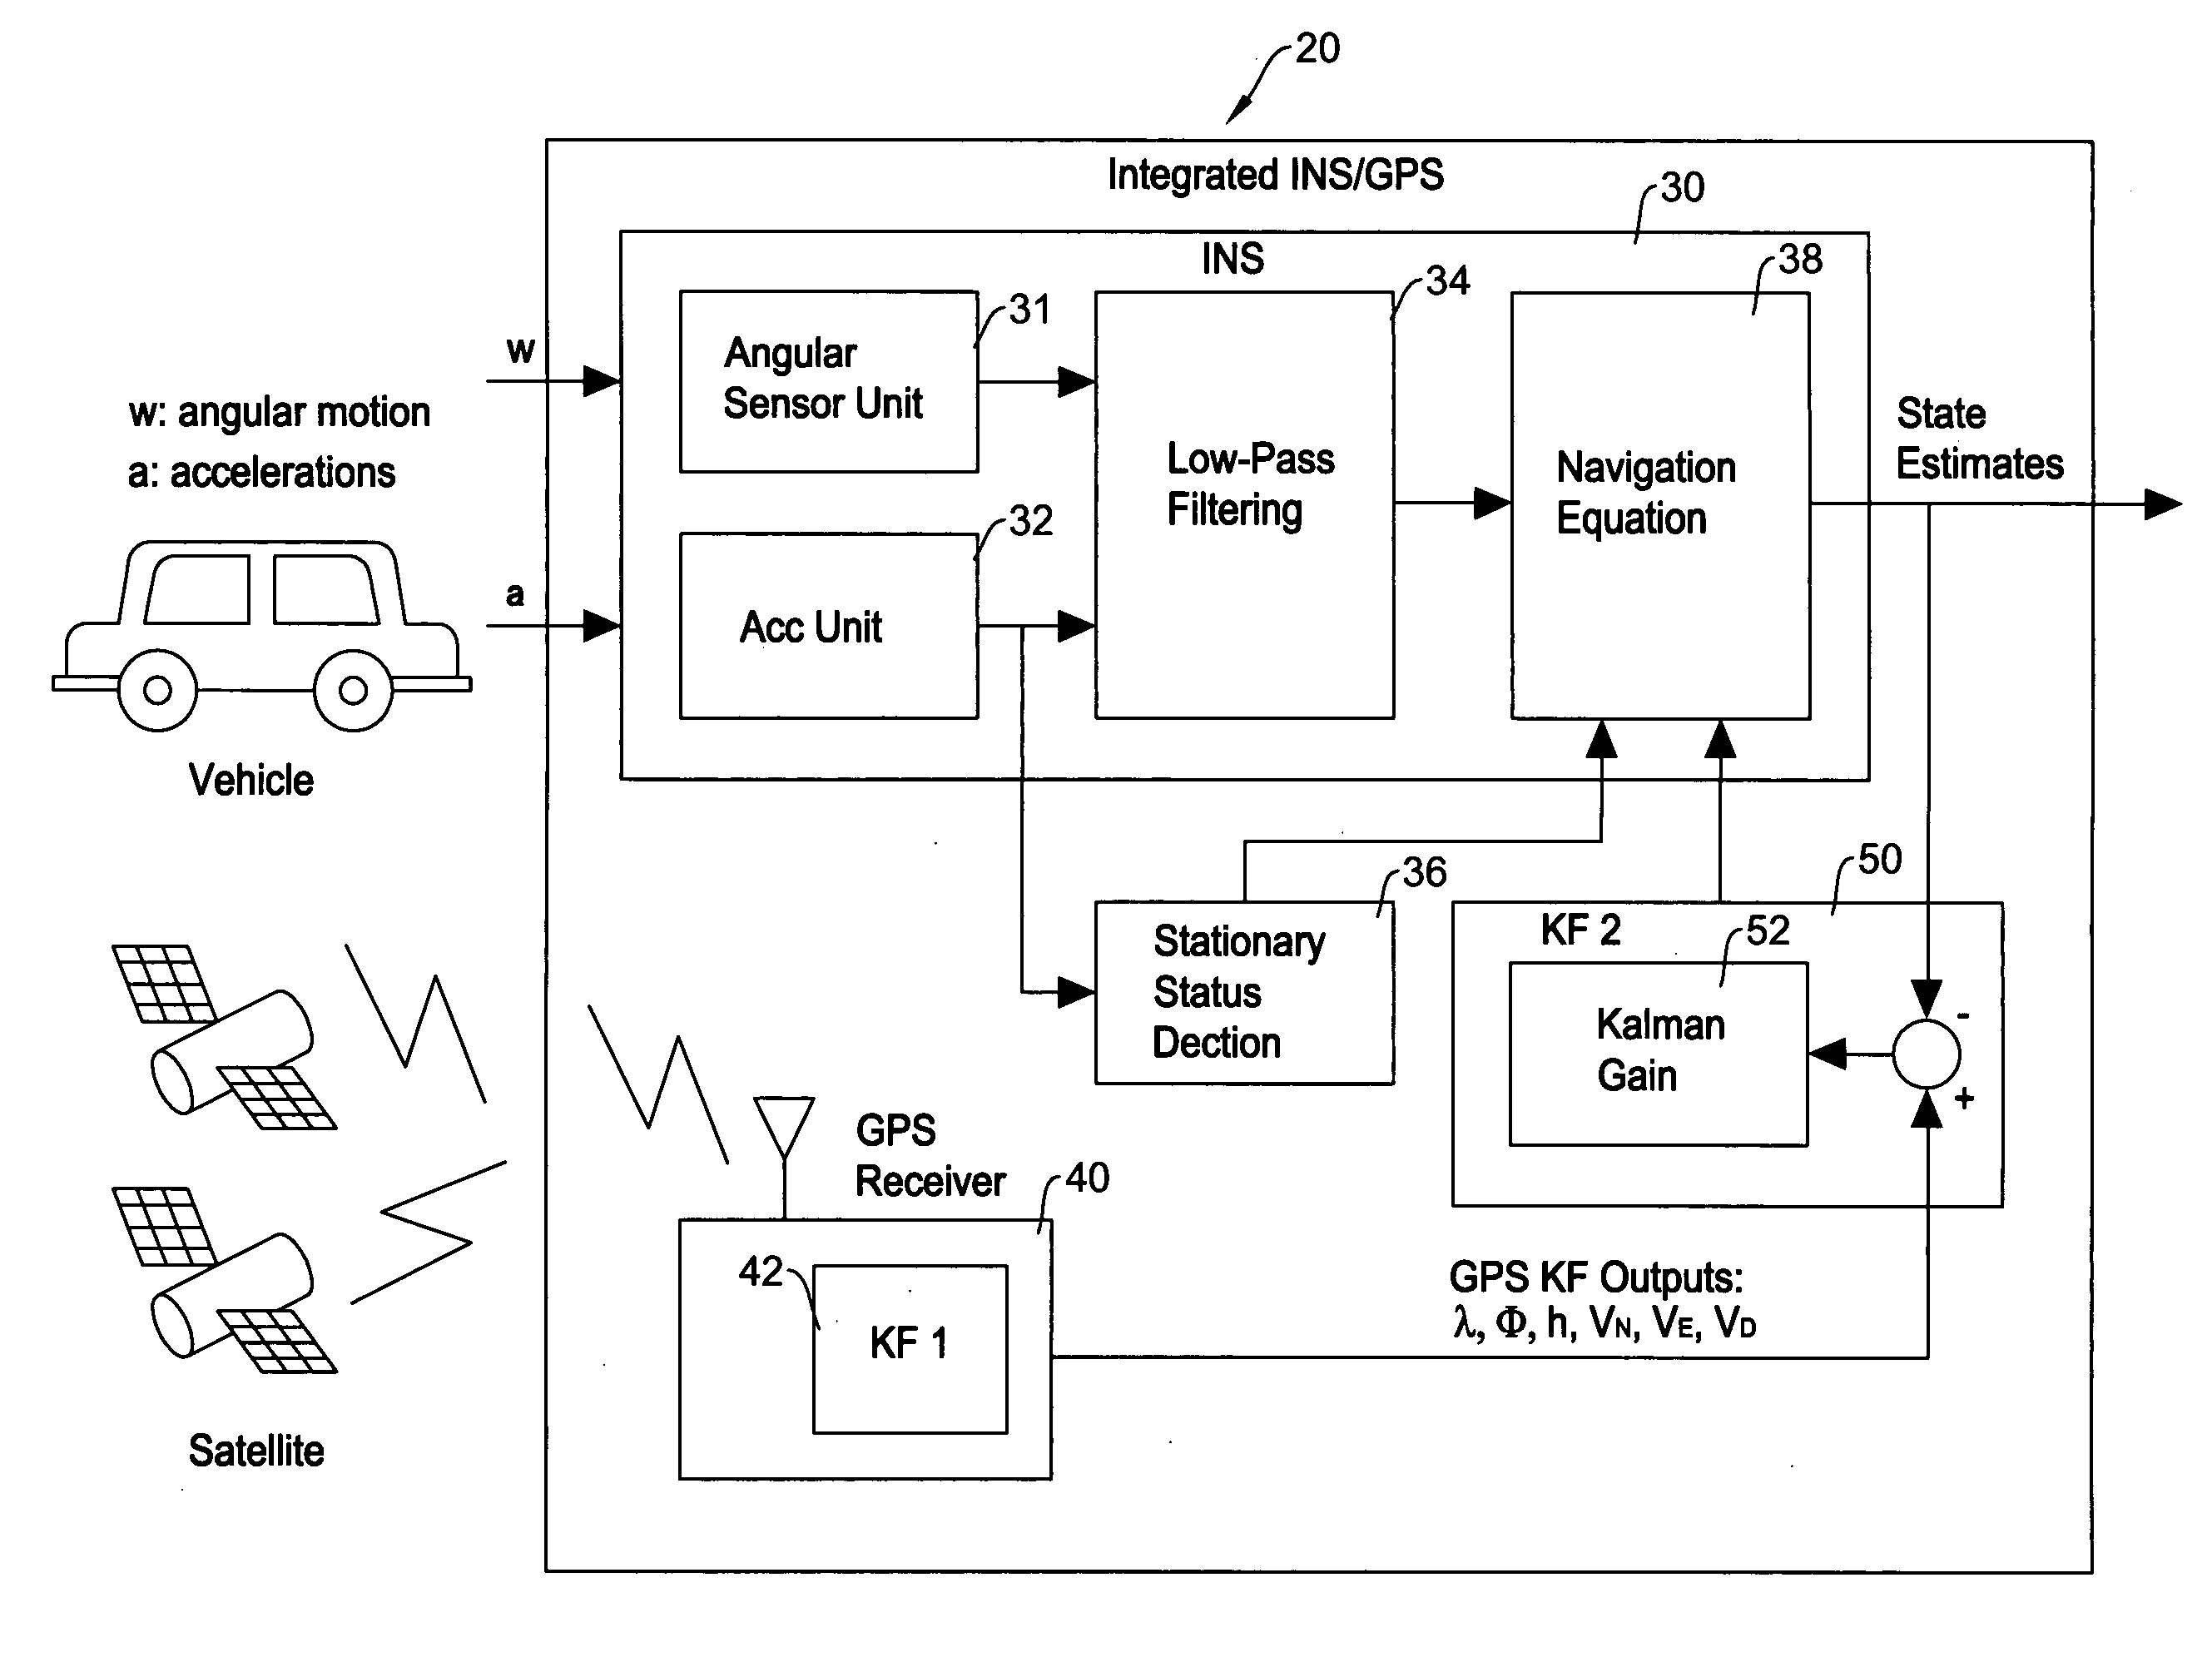 Method and apparatus to detect platform stationary status using three-axis accelerometer outputs